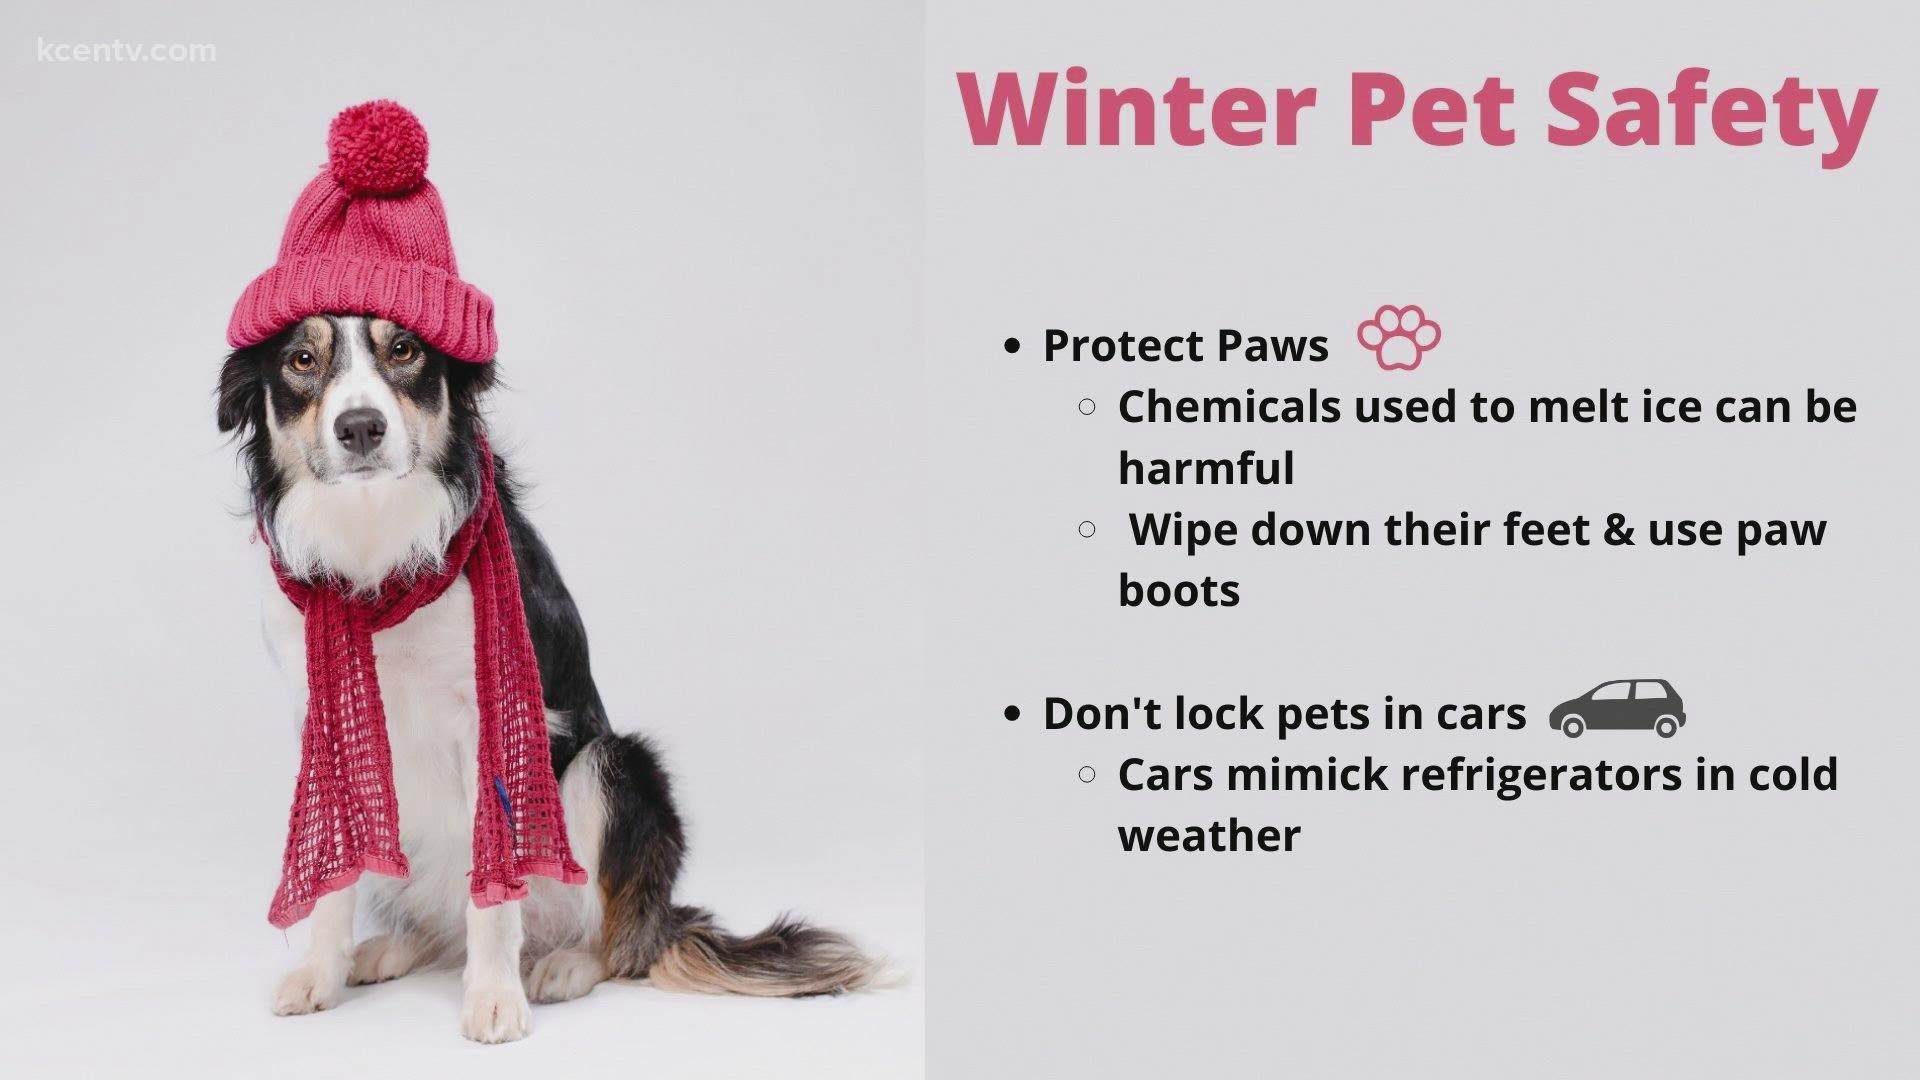 Chemicals used to melt ice can be harmful. Be sure to also wipe down their feet and use paw boots.